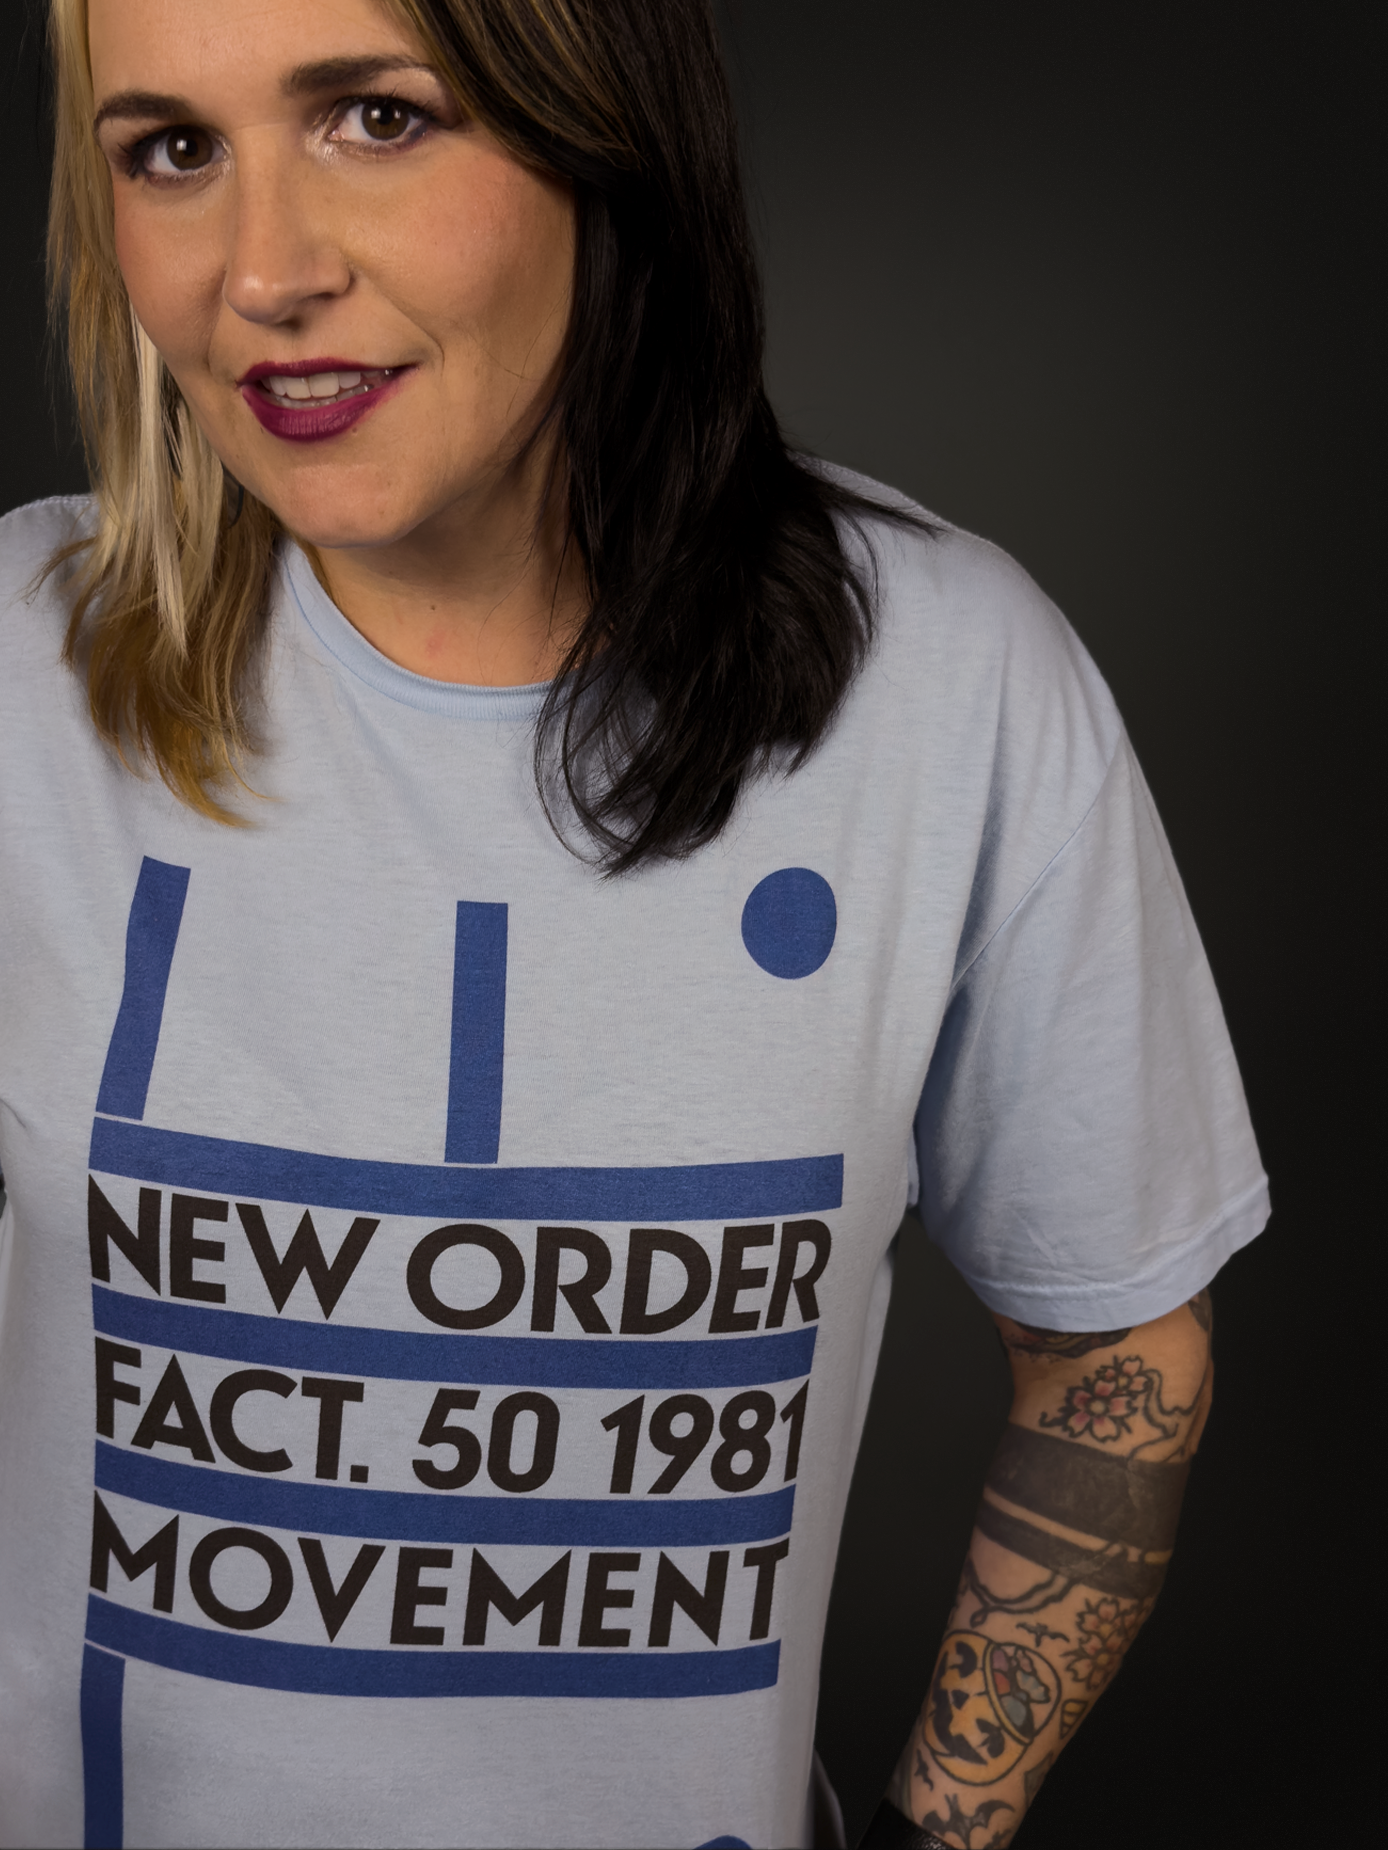 New Order FACT. 50 1981 Movement OFFICIAL Licensed T-Shirt